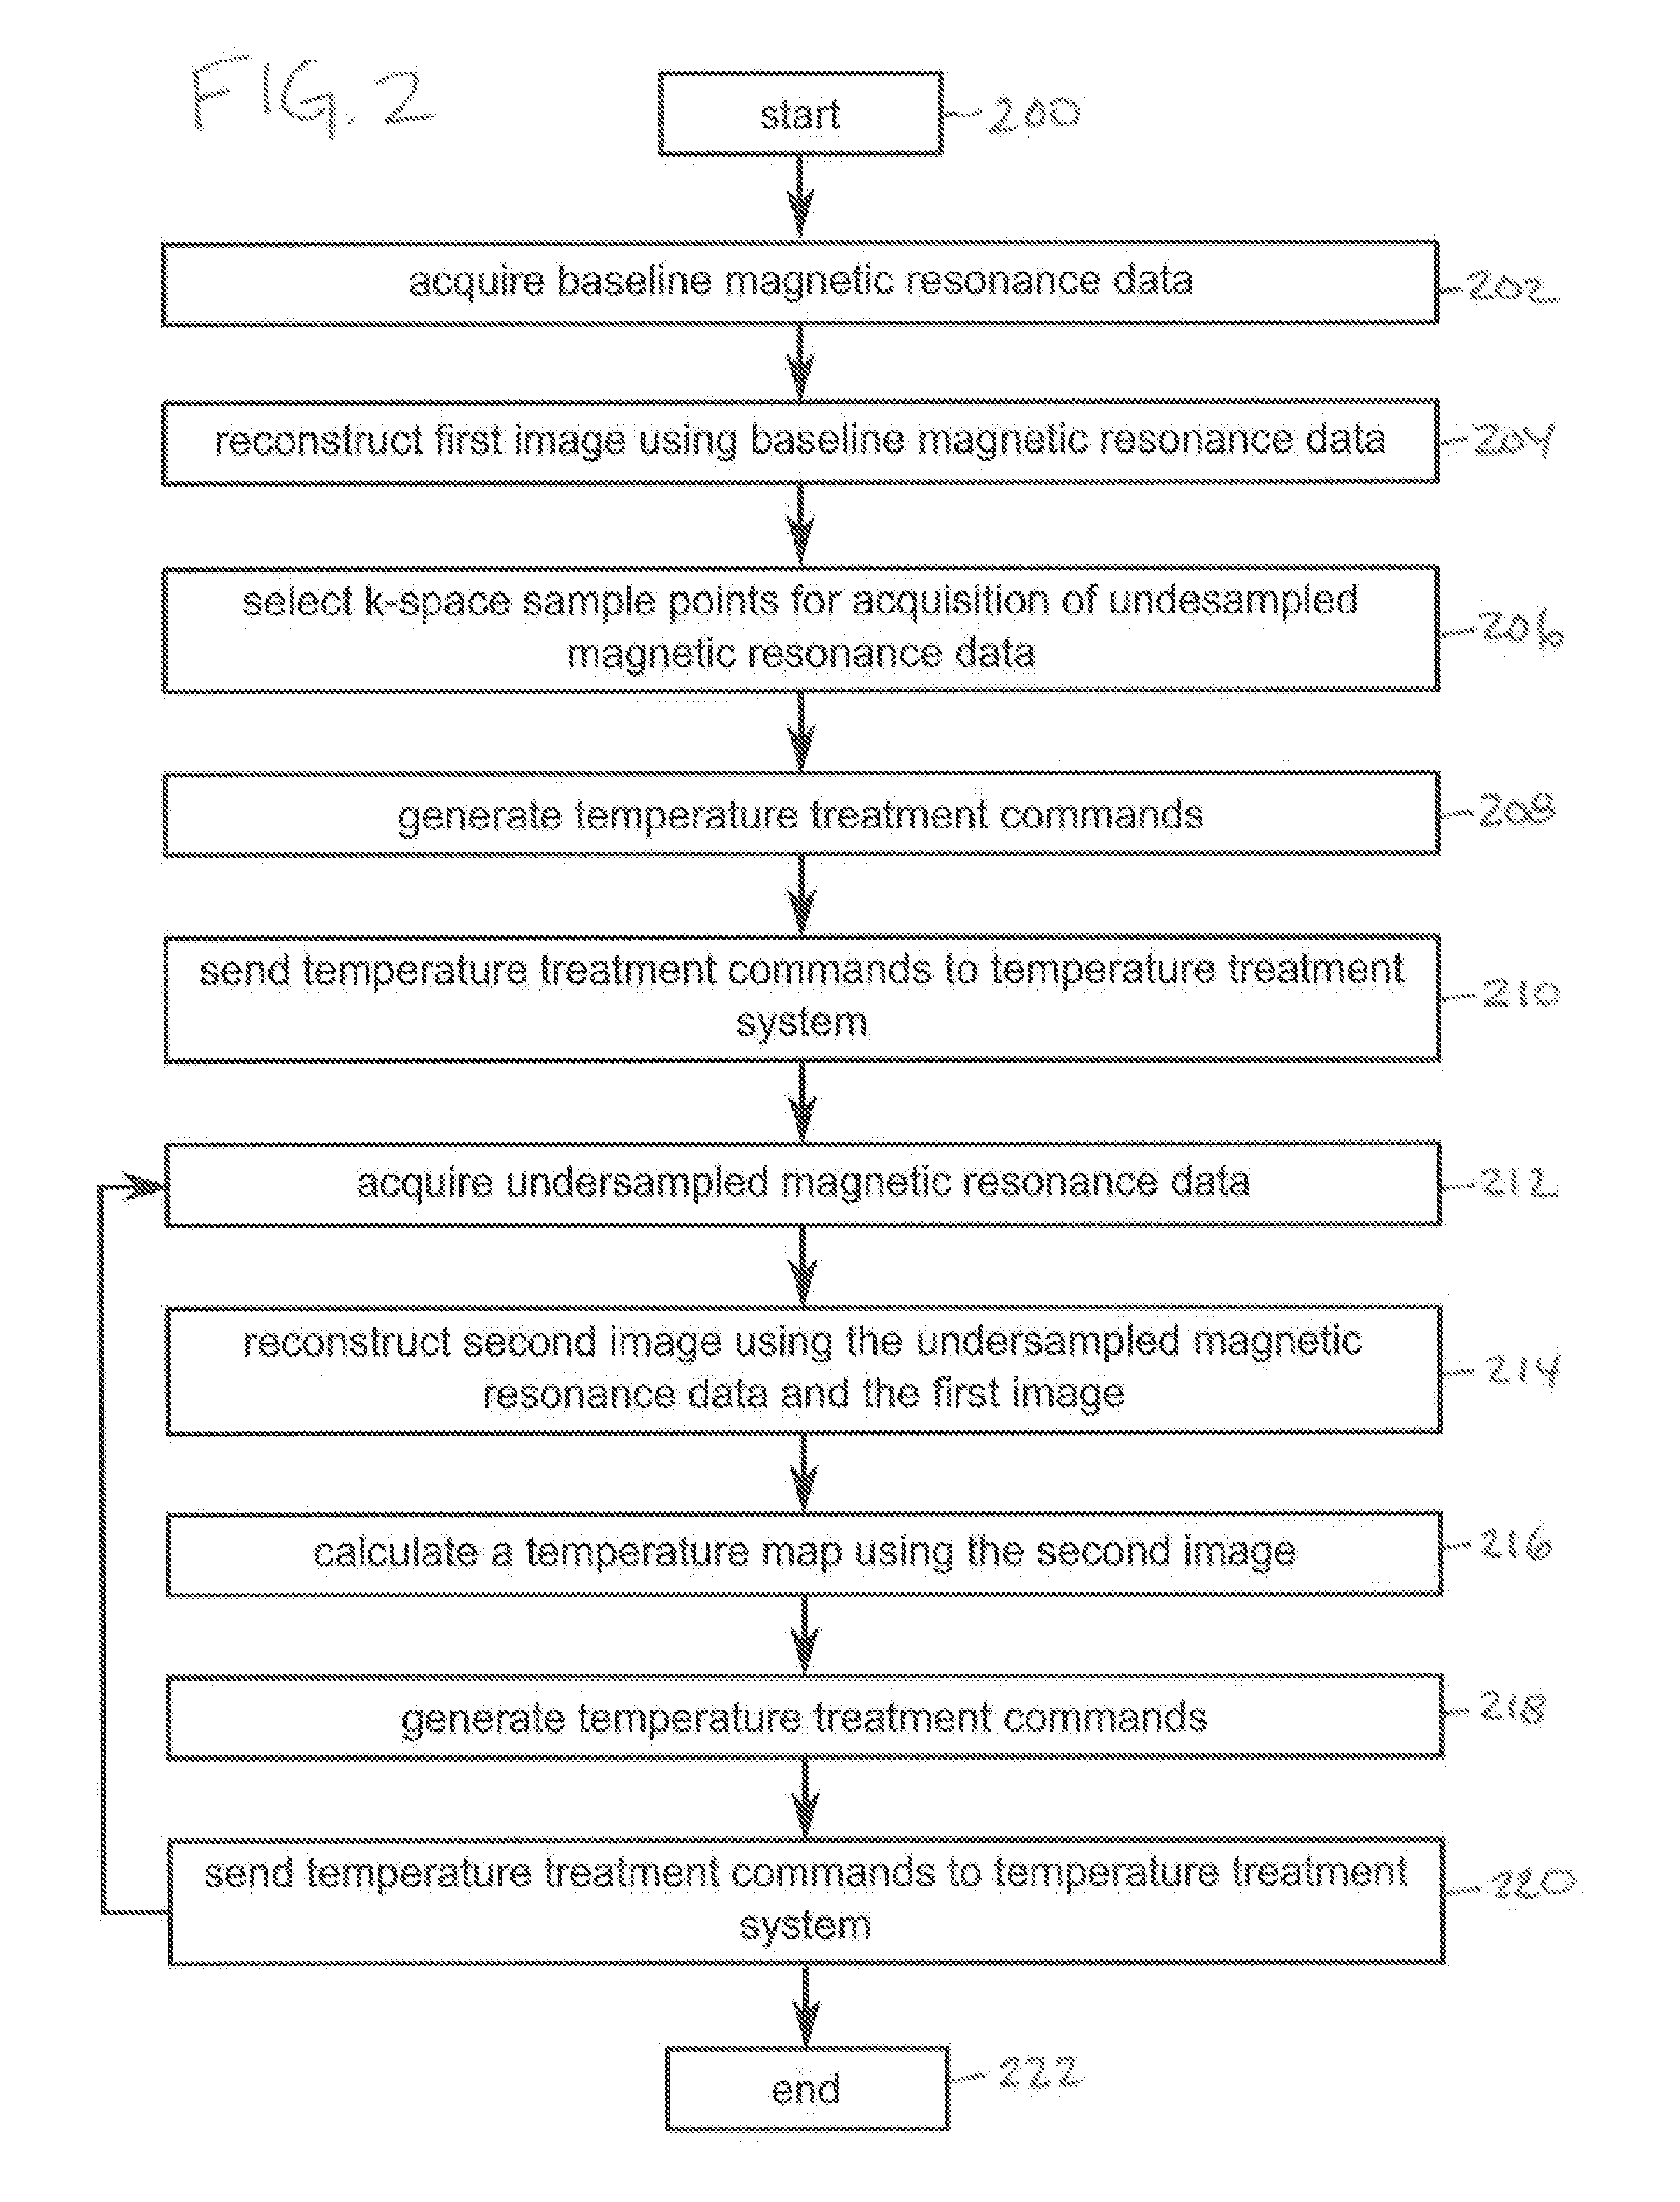 Accelerated mr thermometry mapping involving an image ratio constrained reconstruction